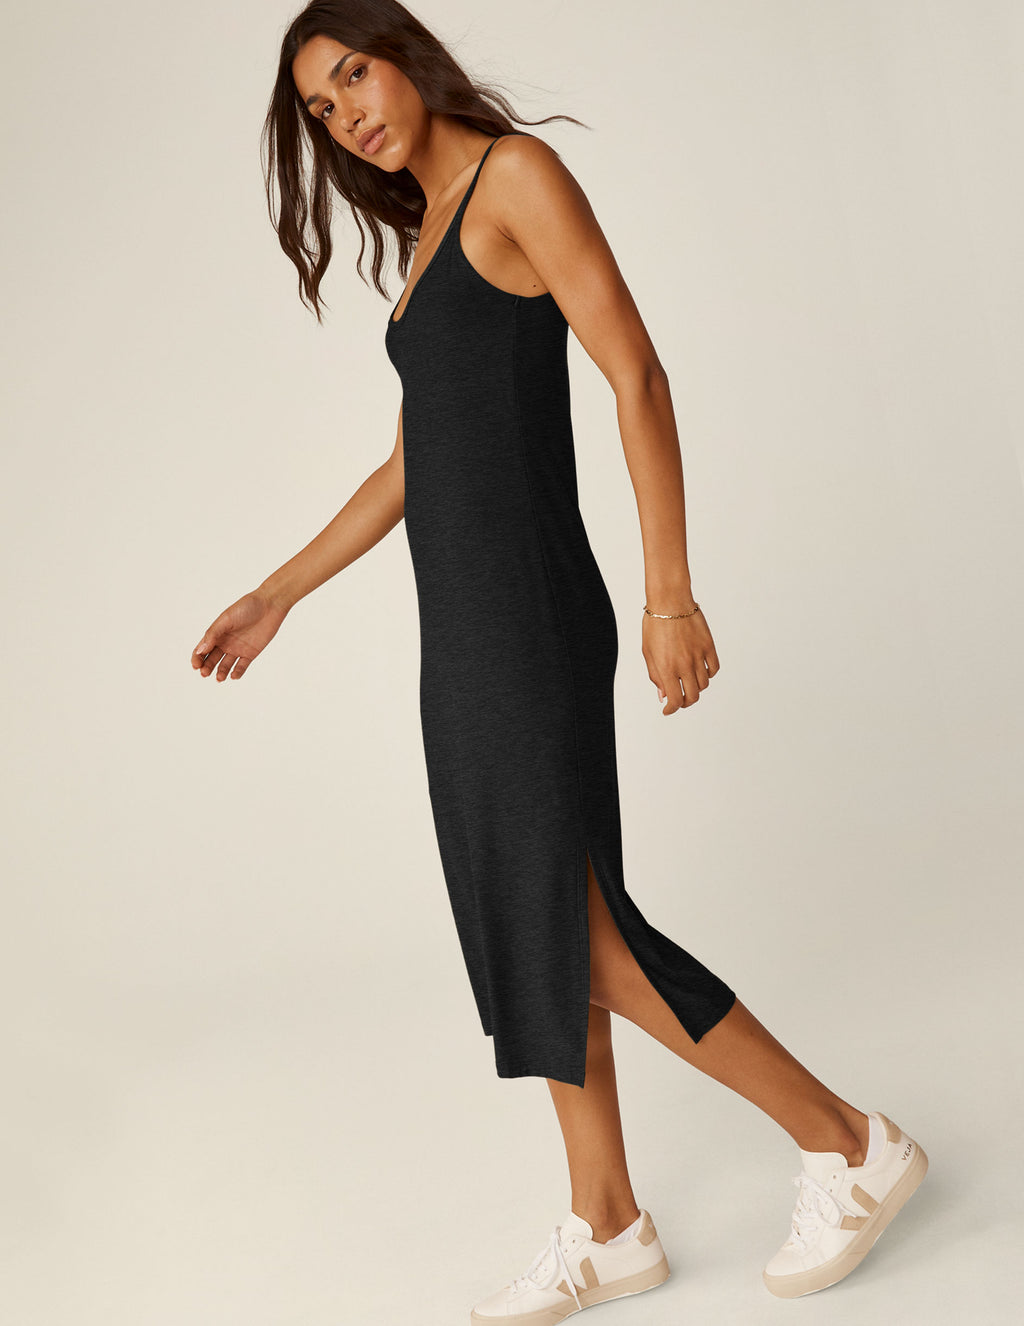 Featherweight Simplicity Dress Featured Image